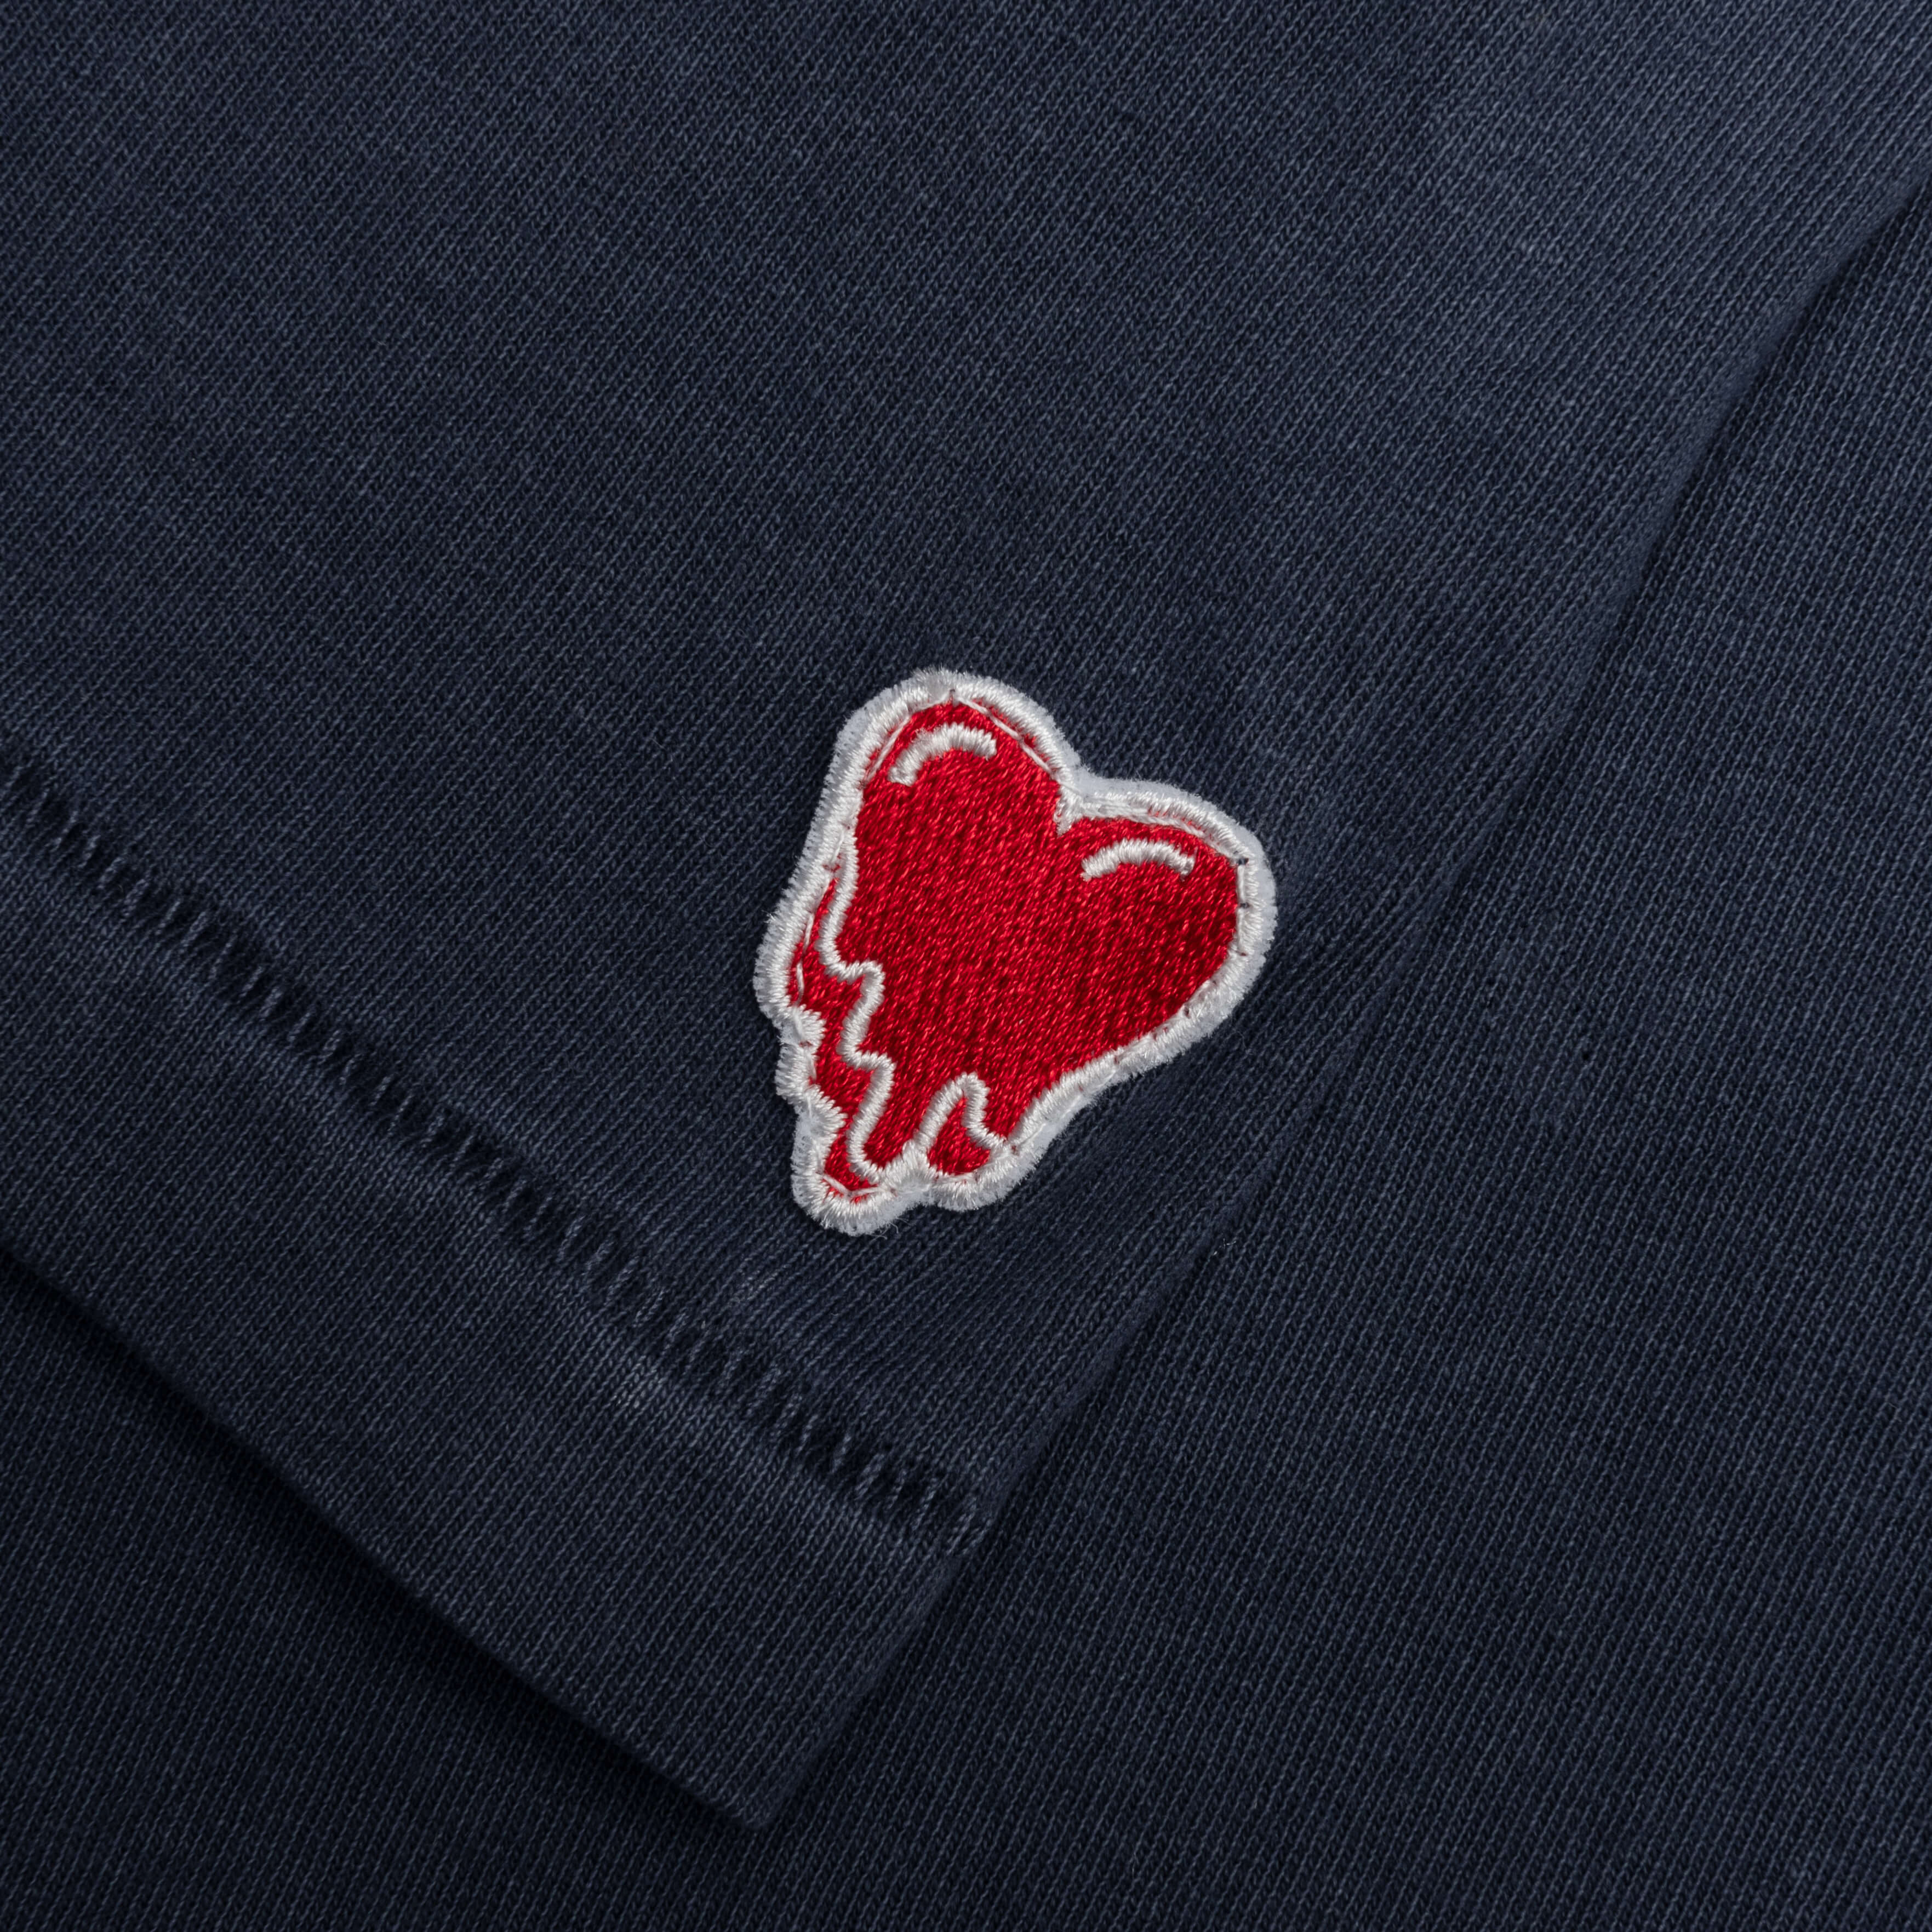 Heart Logo Tee - Navy, , large image number null